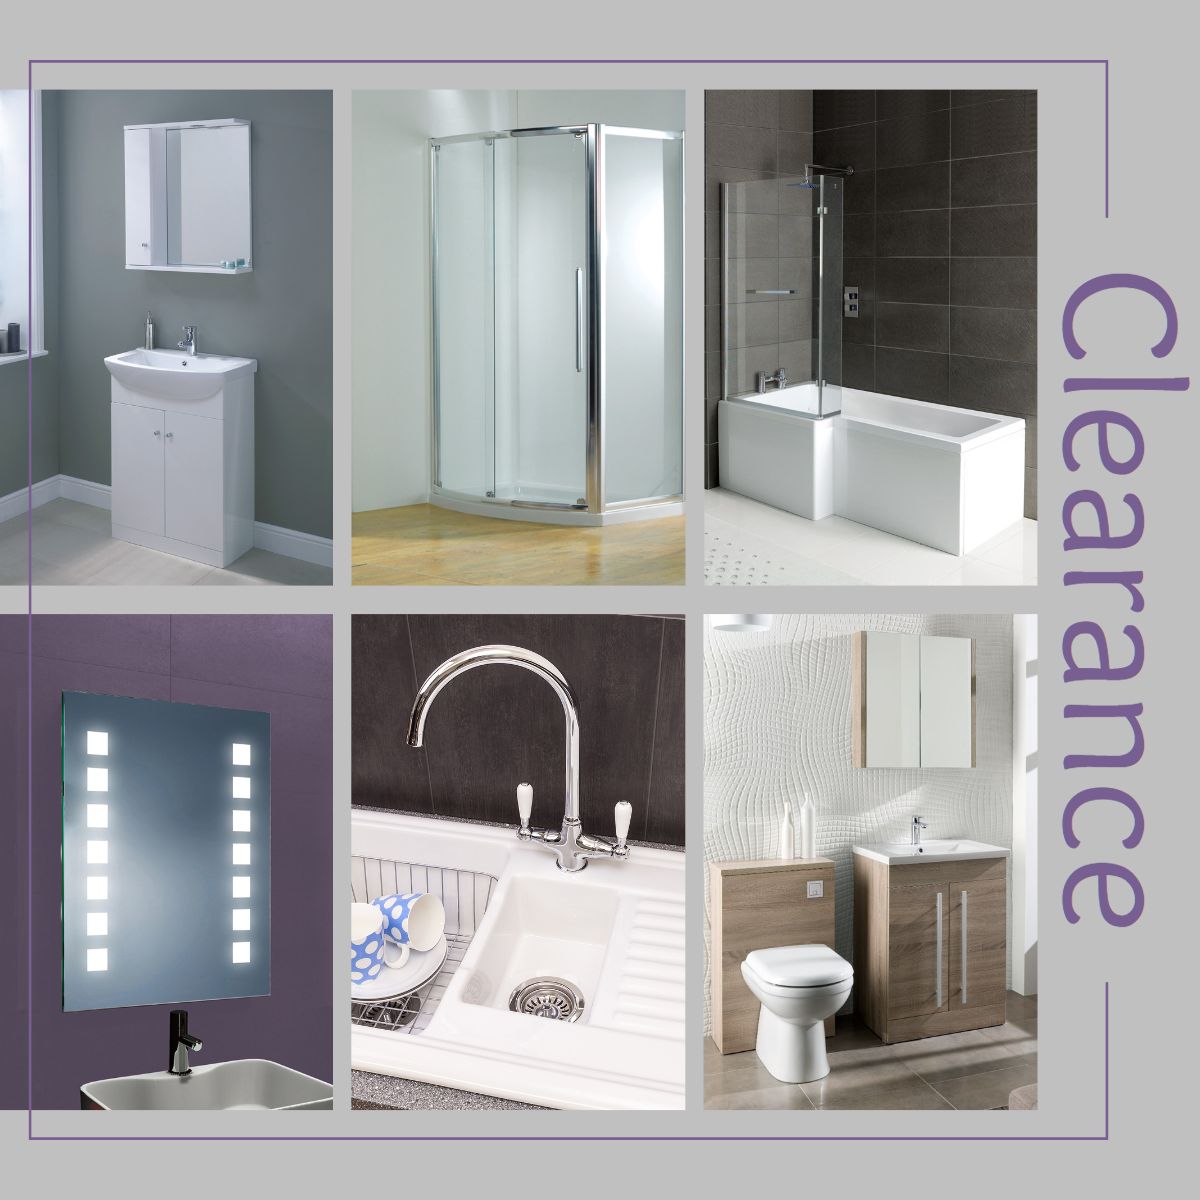 Our clearance section is now LIVE on our website, featuring amazing deals on top-quality bathroom products! We've got everything you need to upgrade your bathroom at unbeatable prices. Head to our website now and grab a bargain before they're all gone! #ClearanceSale #Discounts